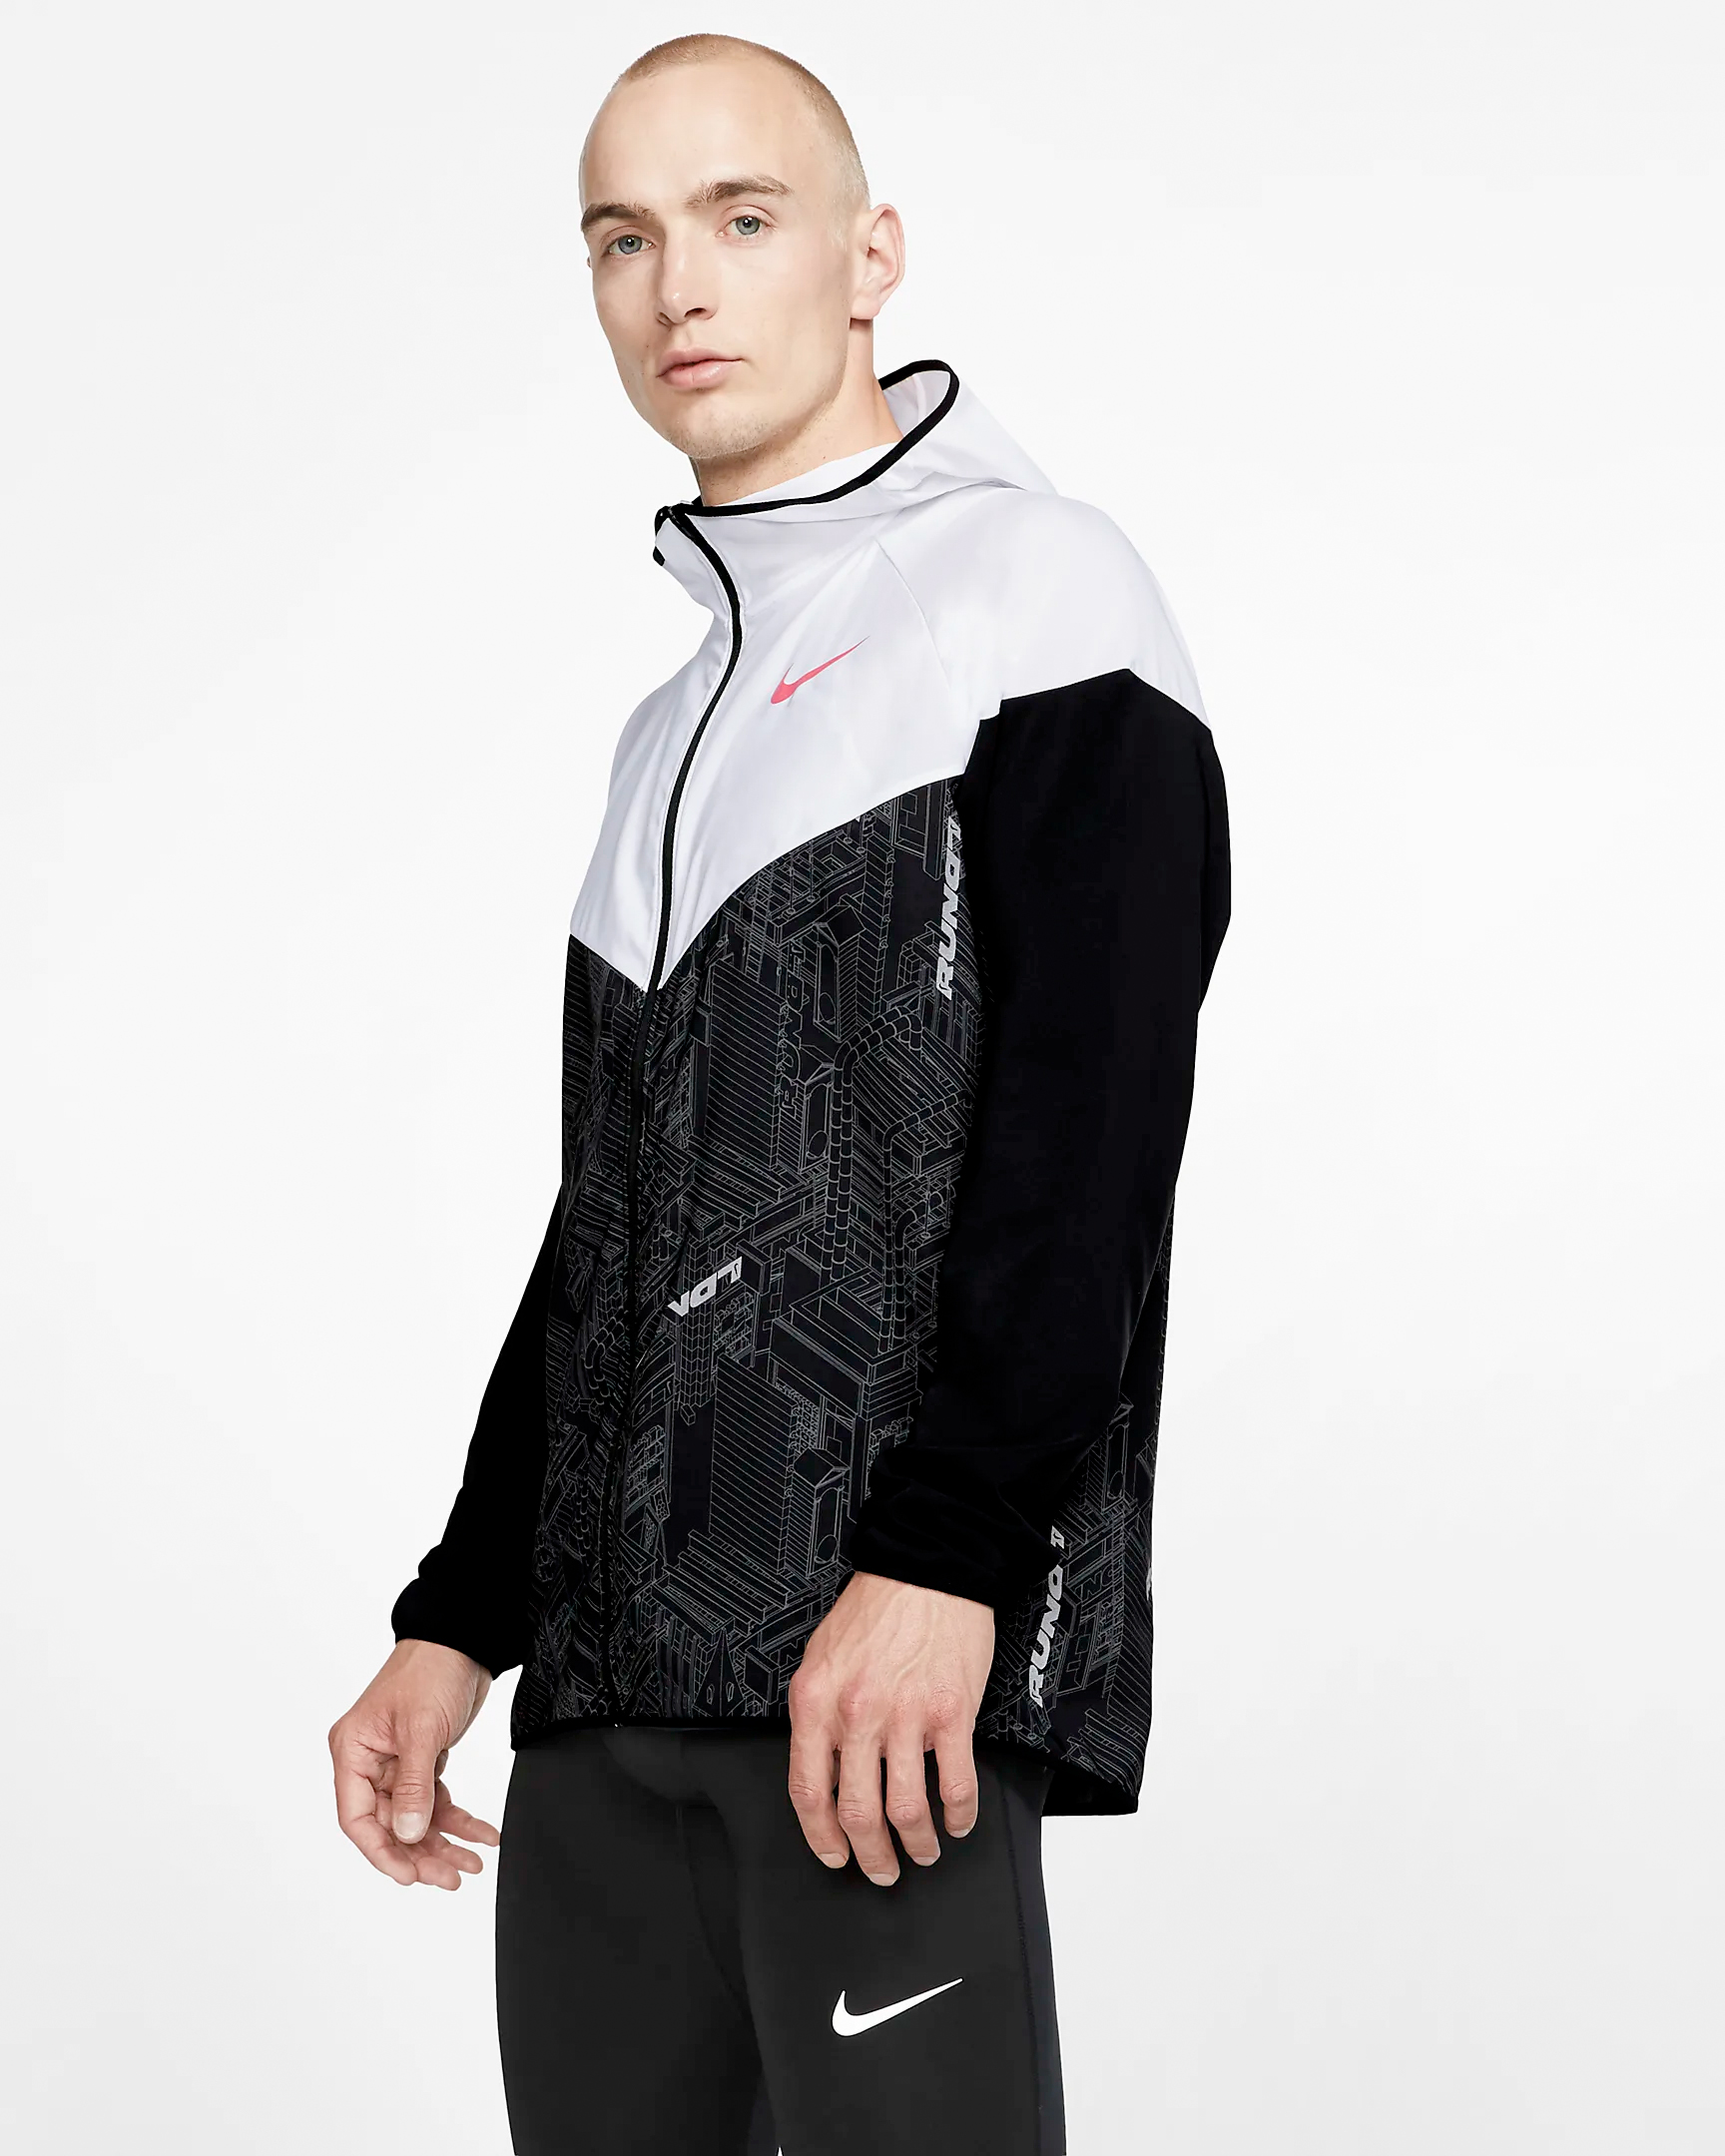 Nike Windrunner (London) - Fonts In Use